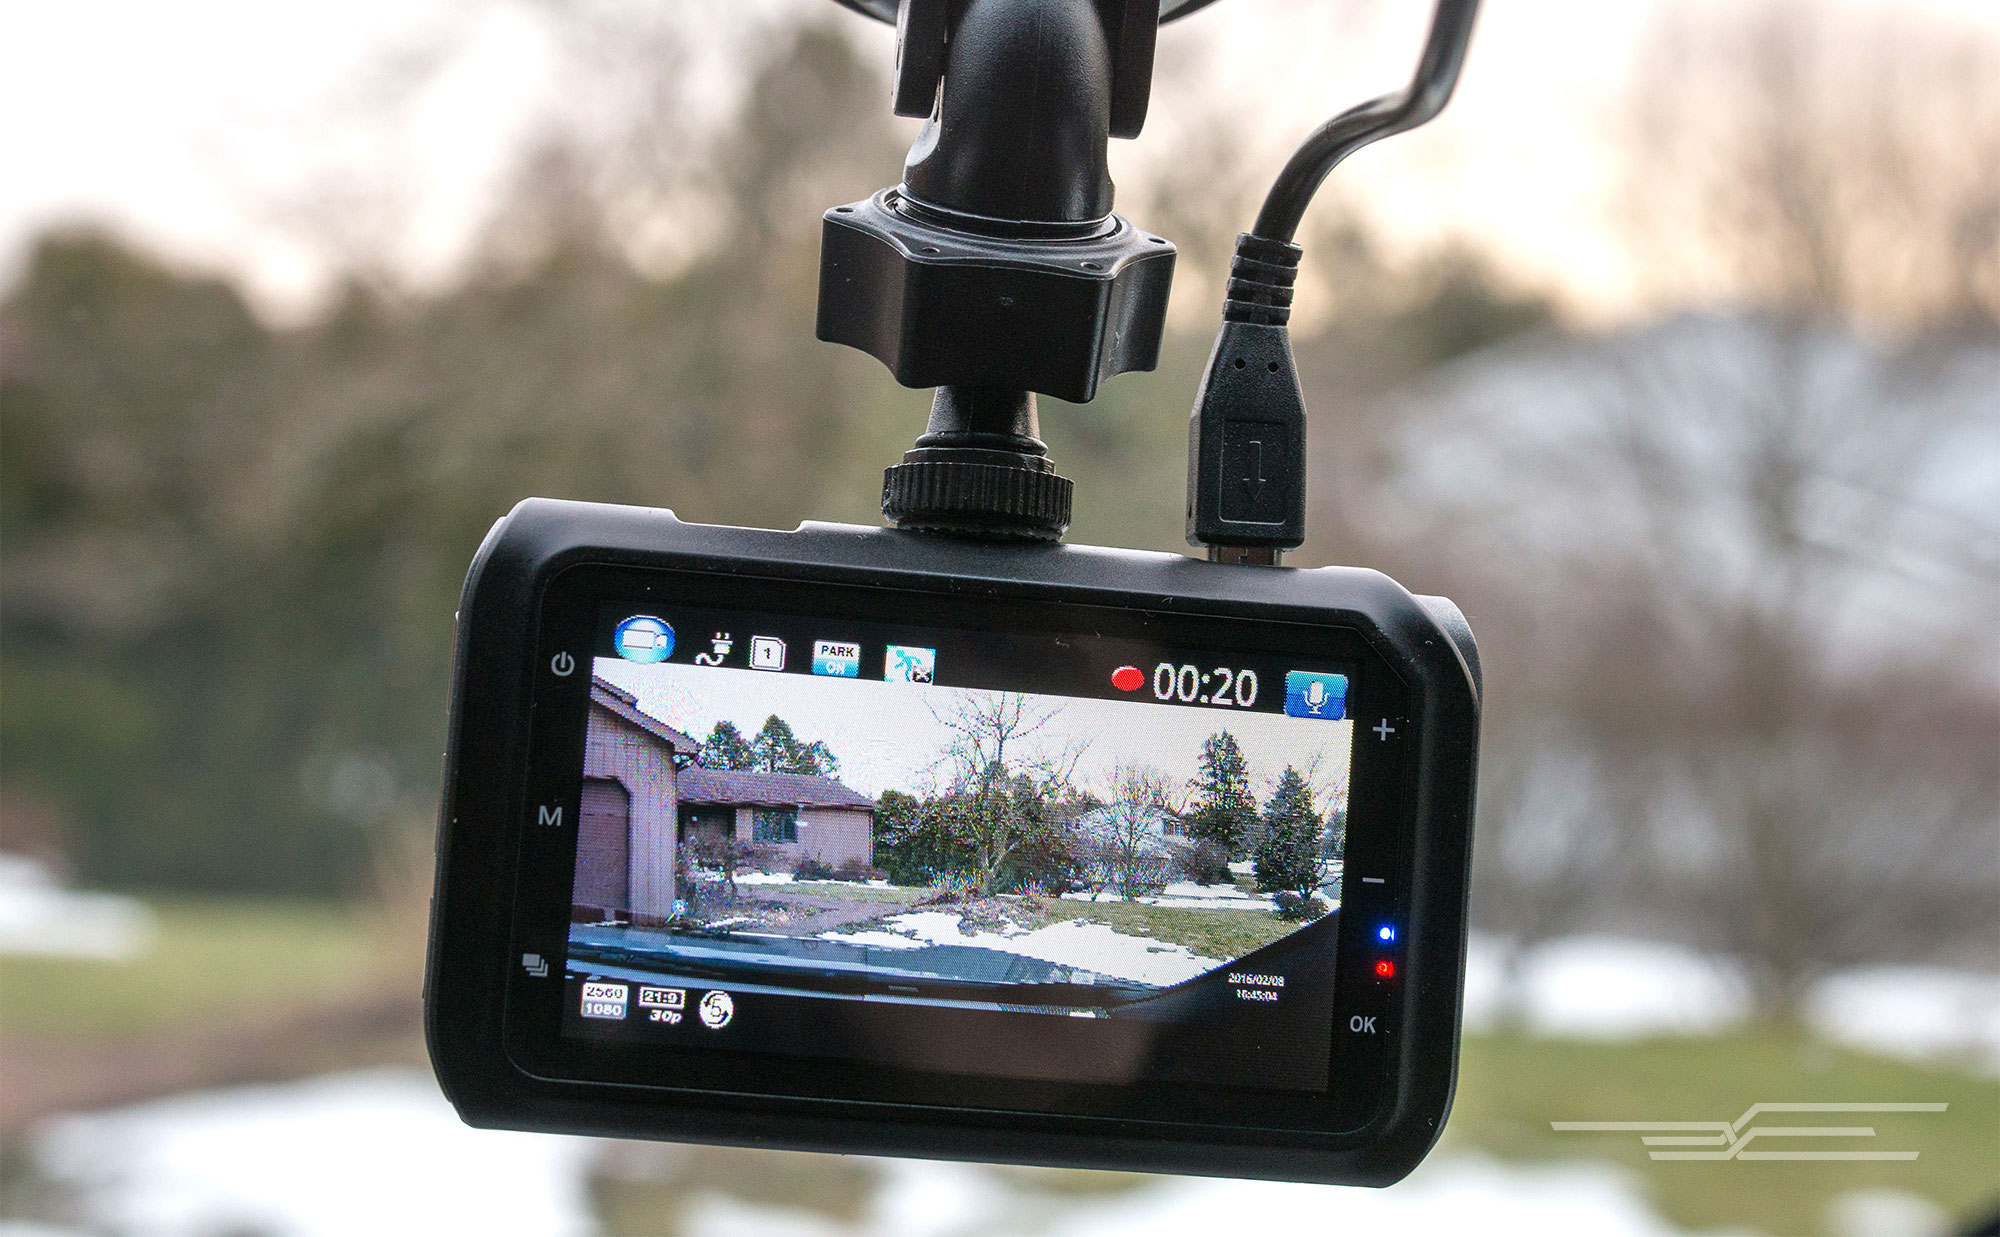 How Fleet Dash Cameras can Save Time, Money, and Jobs